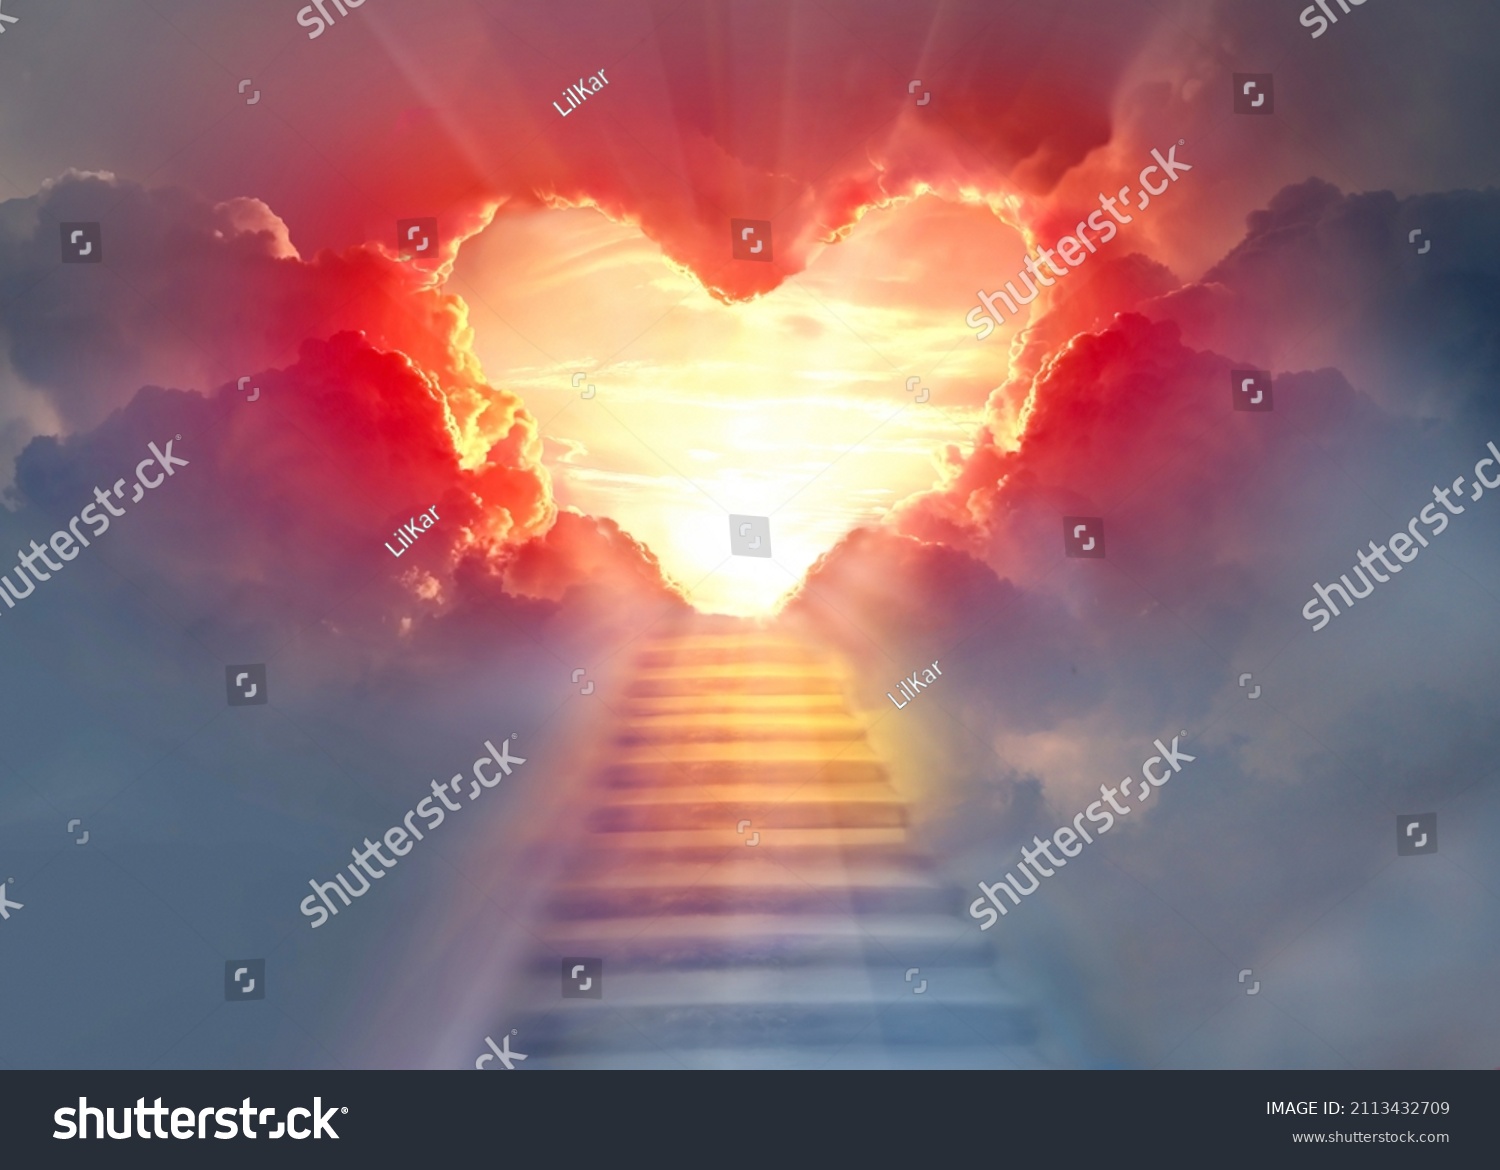 Stairway to Heaven.Stairs in sky.  Concept with sun and clouds.  Religion  background. Red heart shaped sky at sunset. Love background with copy space. #2113432709